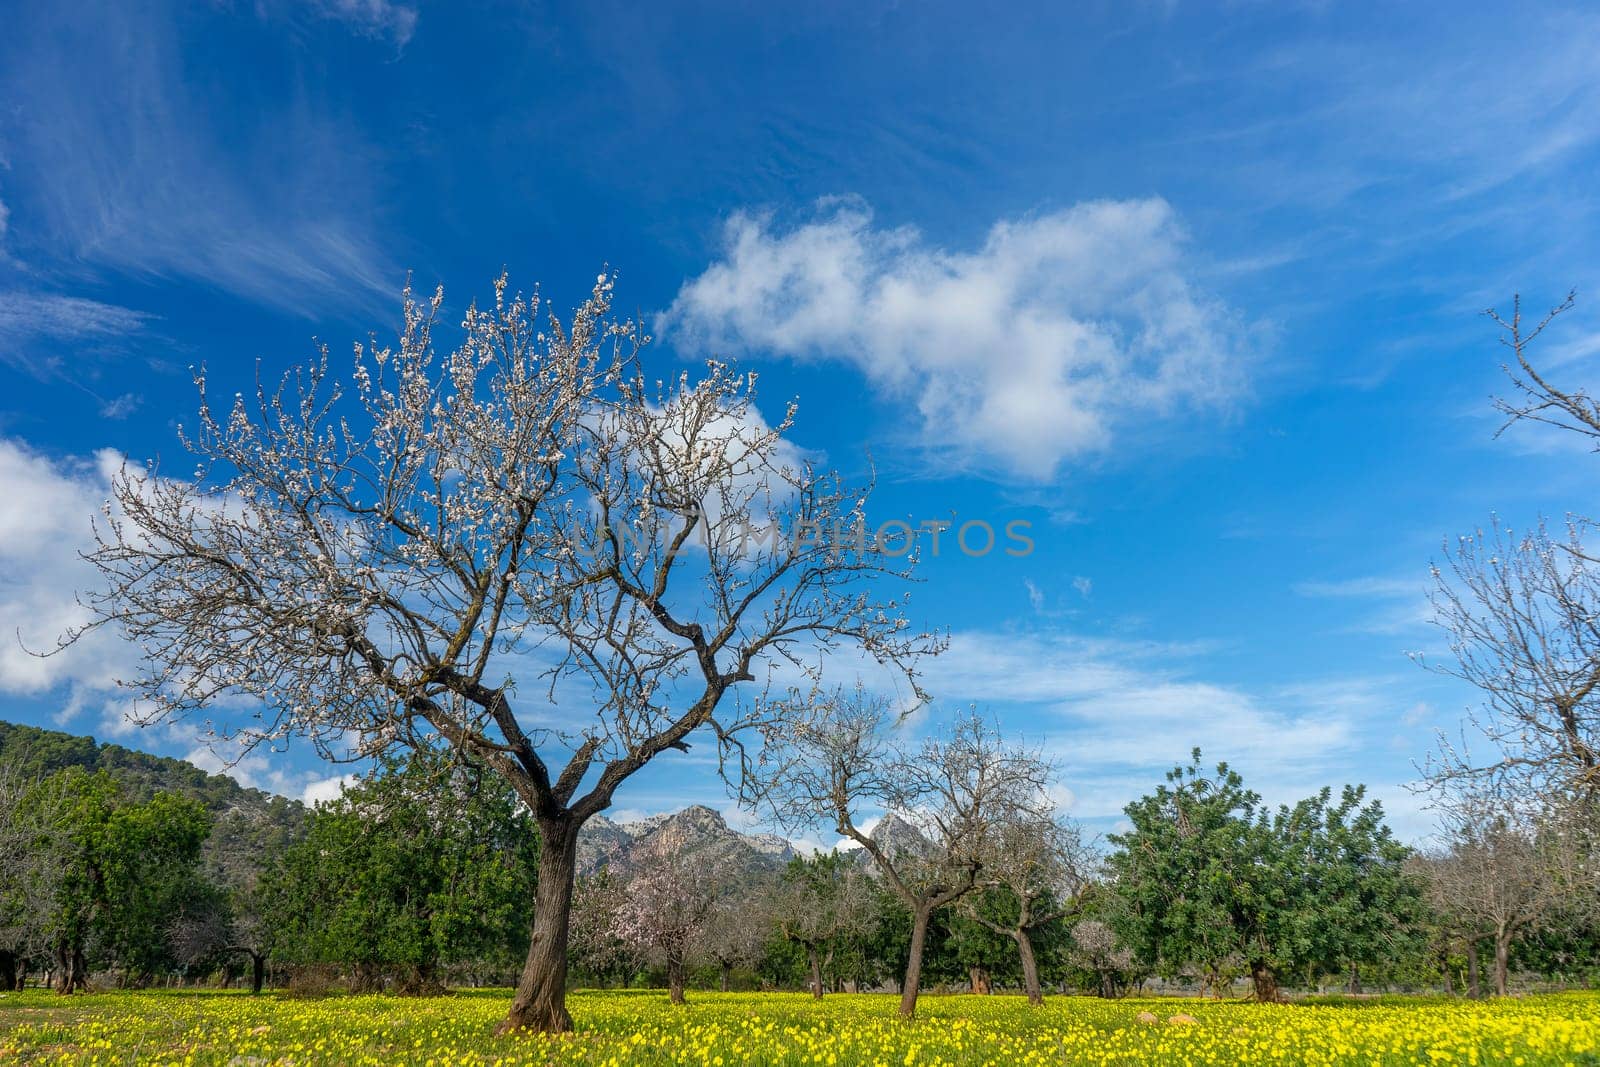 Delicate almond blossoms adorn the branches of a tree, standing tall amidst a field carpeted with yellow wildflowers. The striking contrast of the blooming tree against the vibrant blue sky, interspersed with wispy clouds, captures the essence of spring in the Mediterranean.